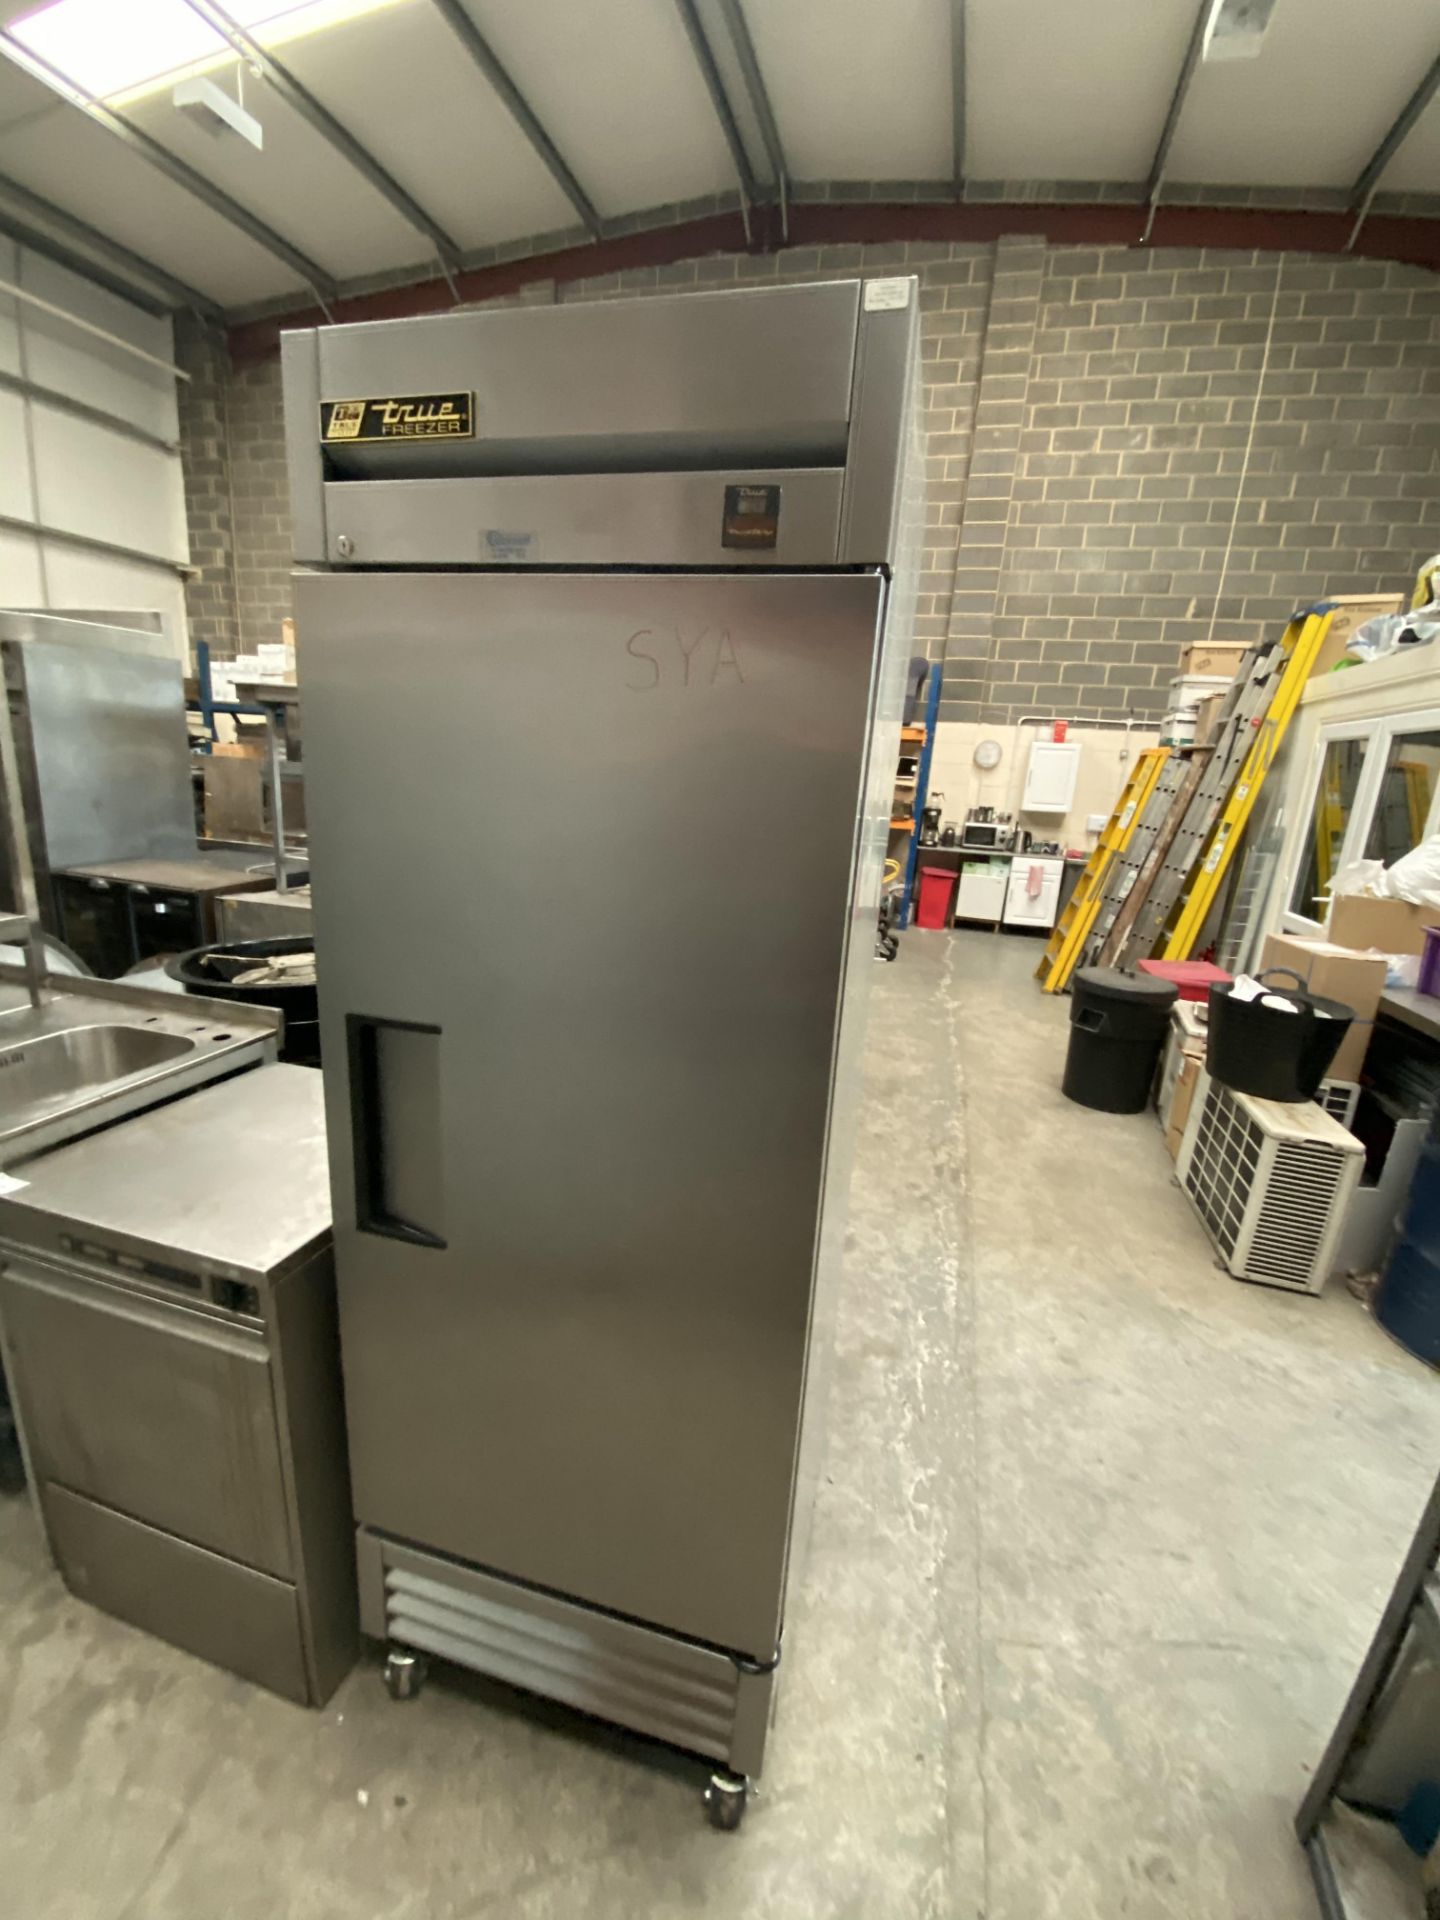 True Stainless Steel Upright Freezer - Image 3 of 4